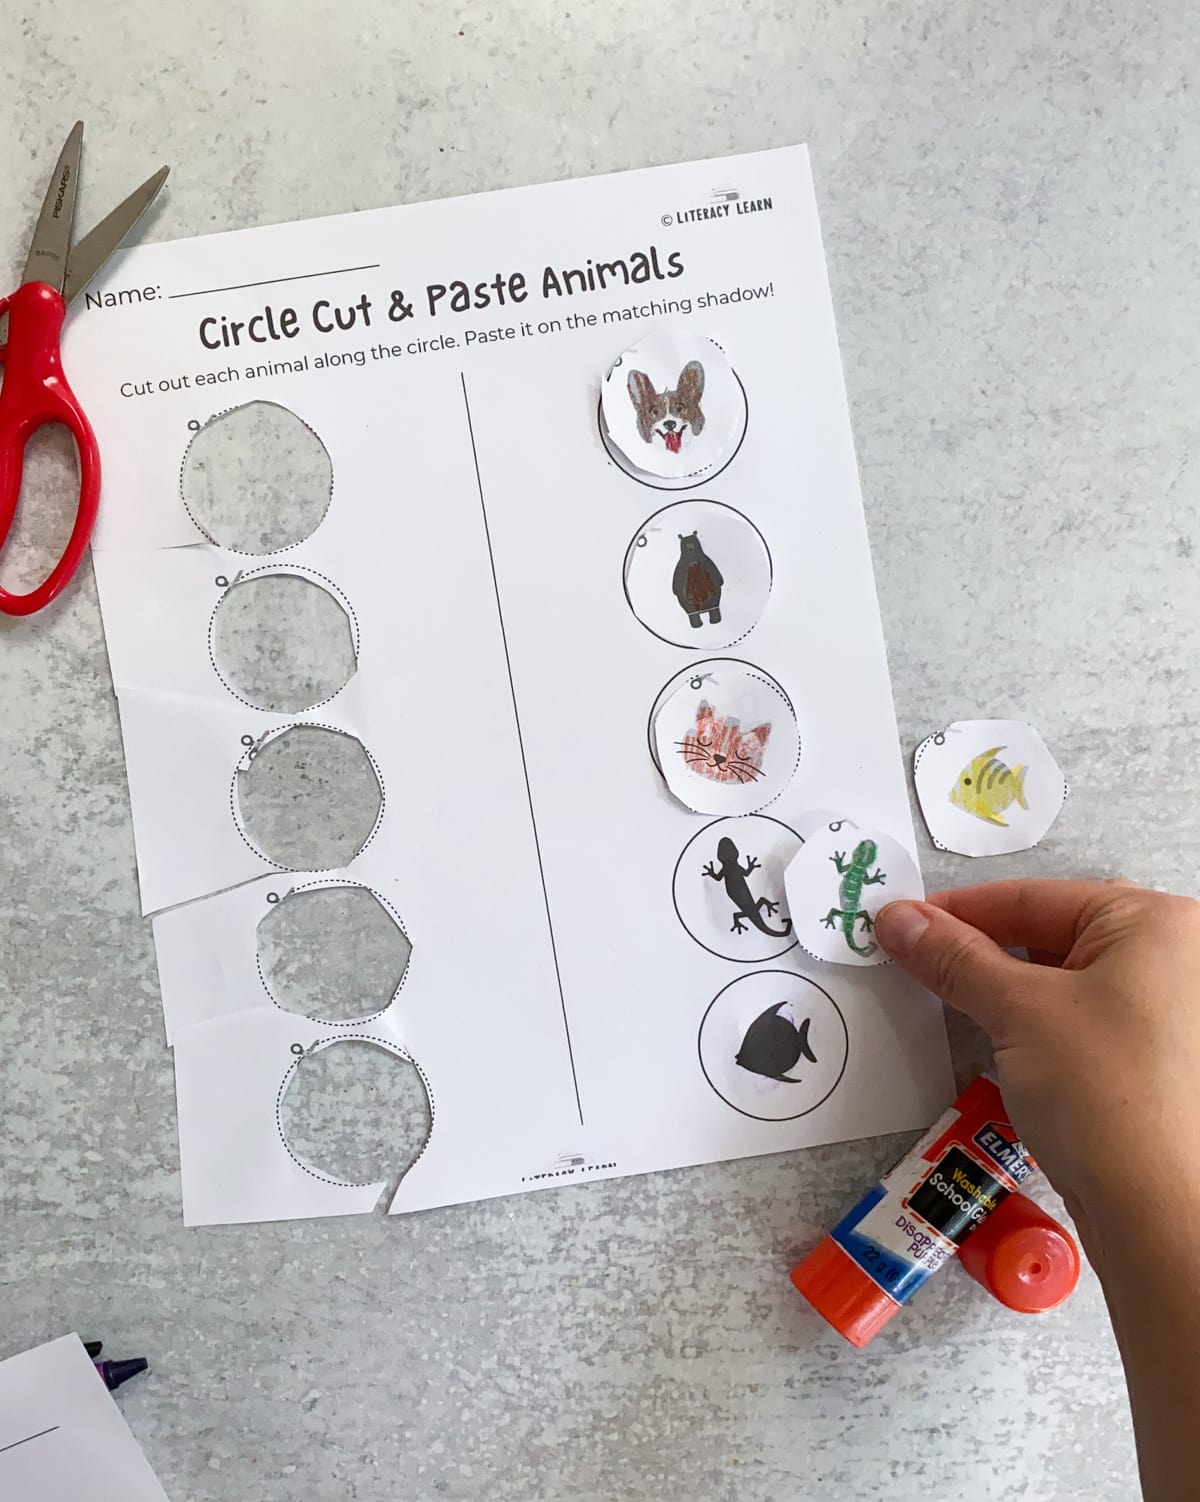 The completed cut and paste animal match worksheet.